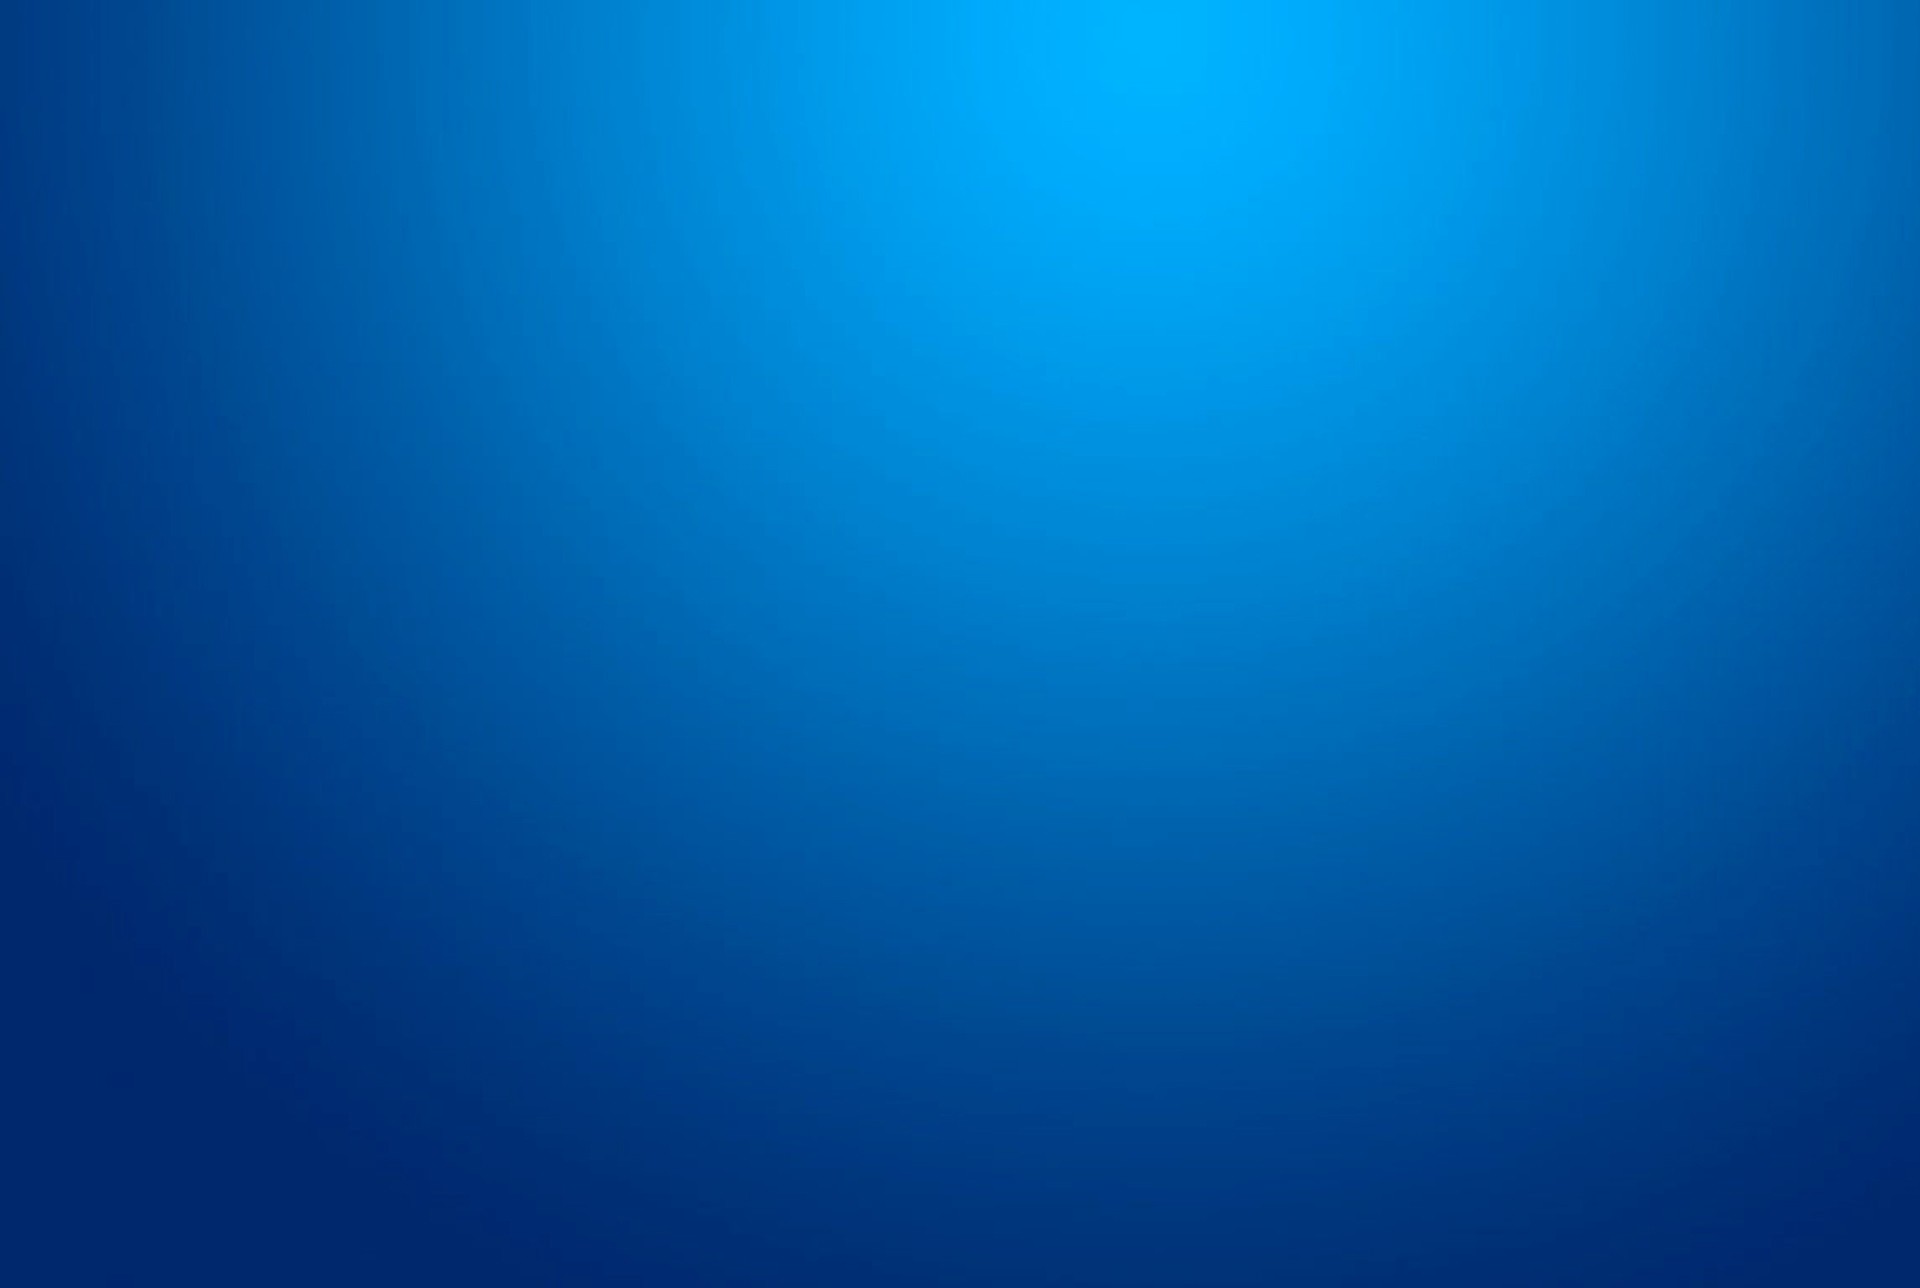 Cool Blue Backgrounds